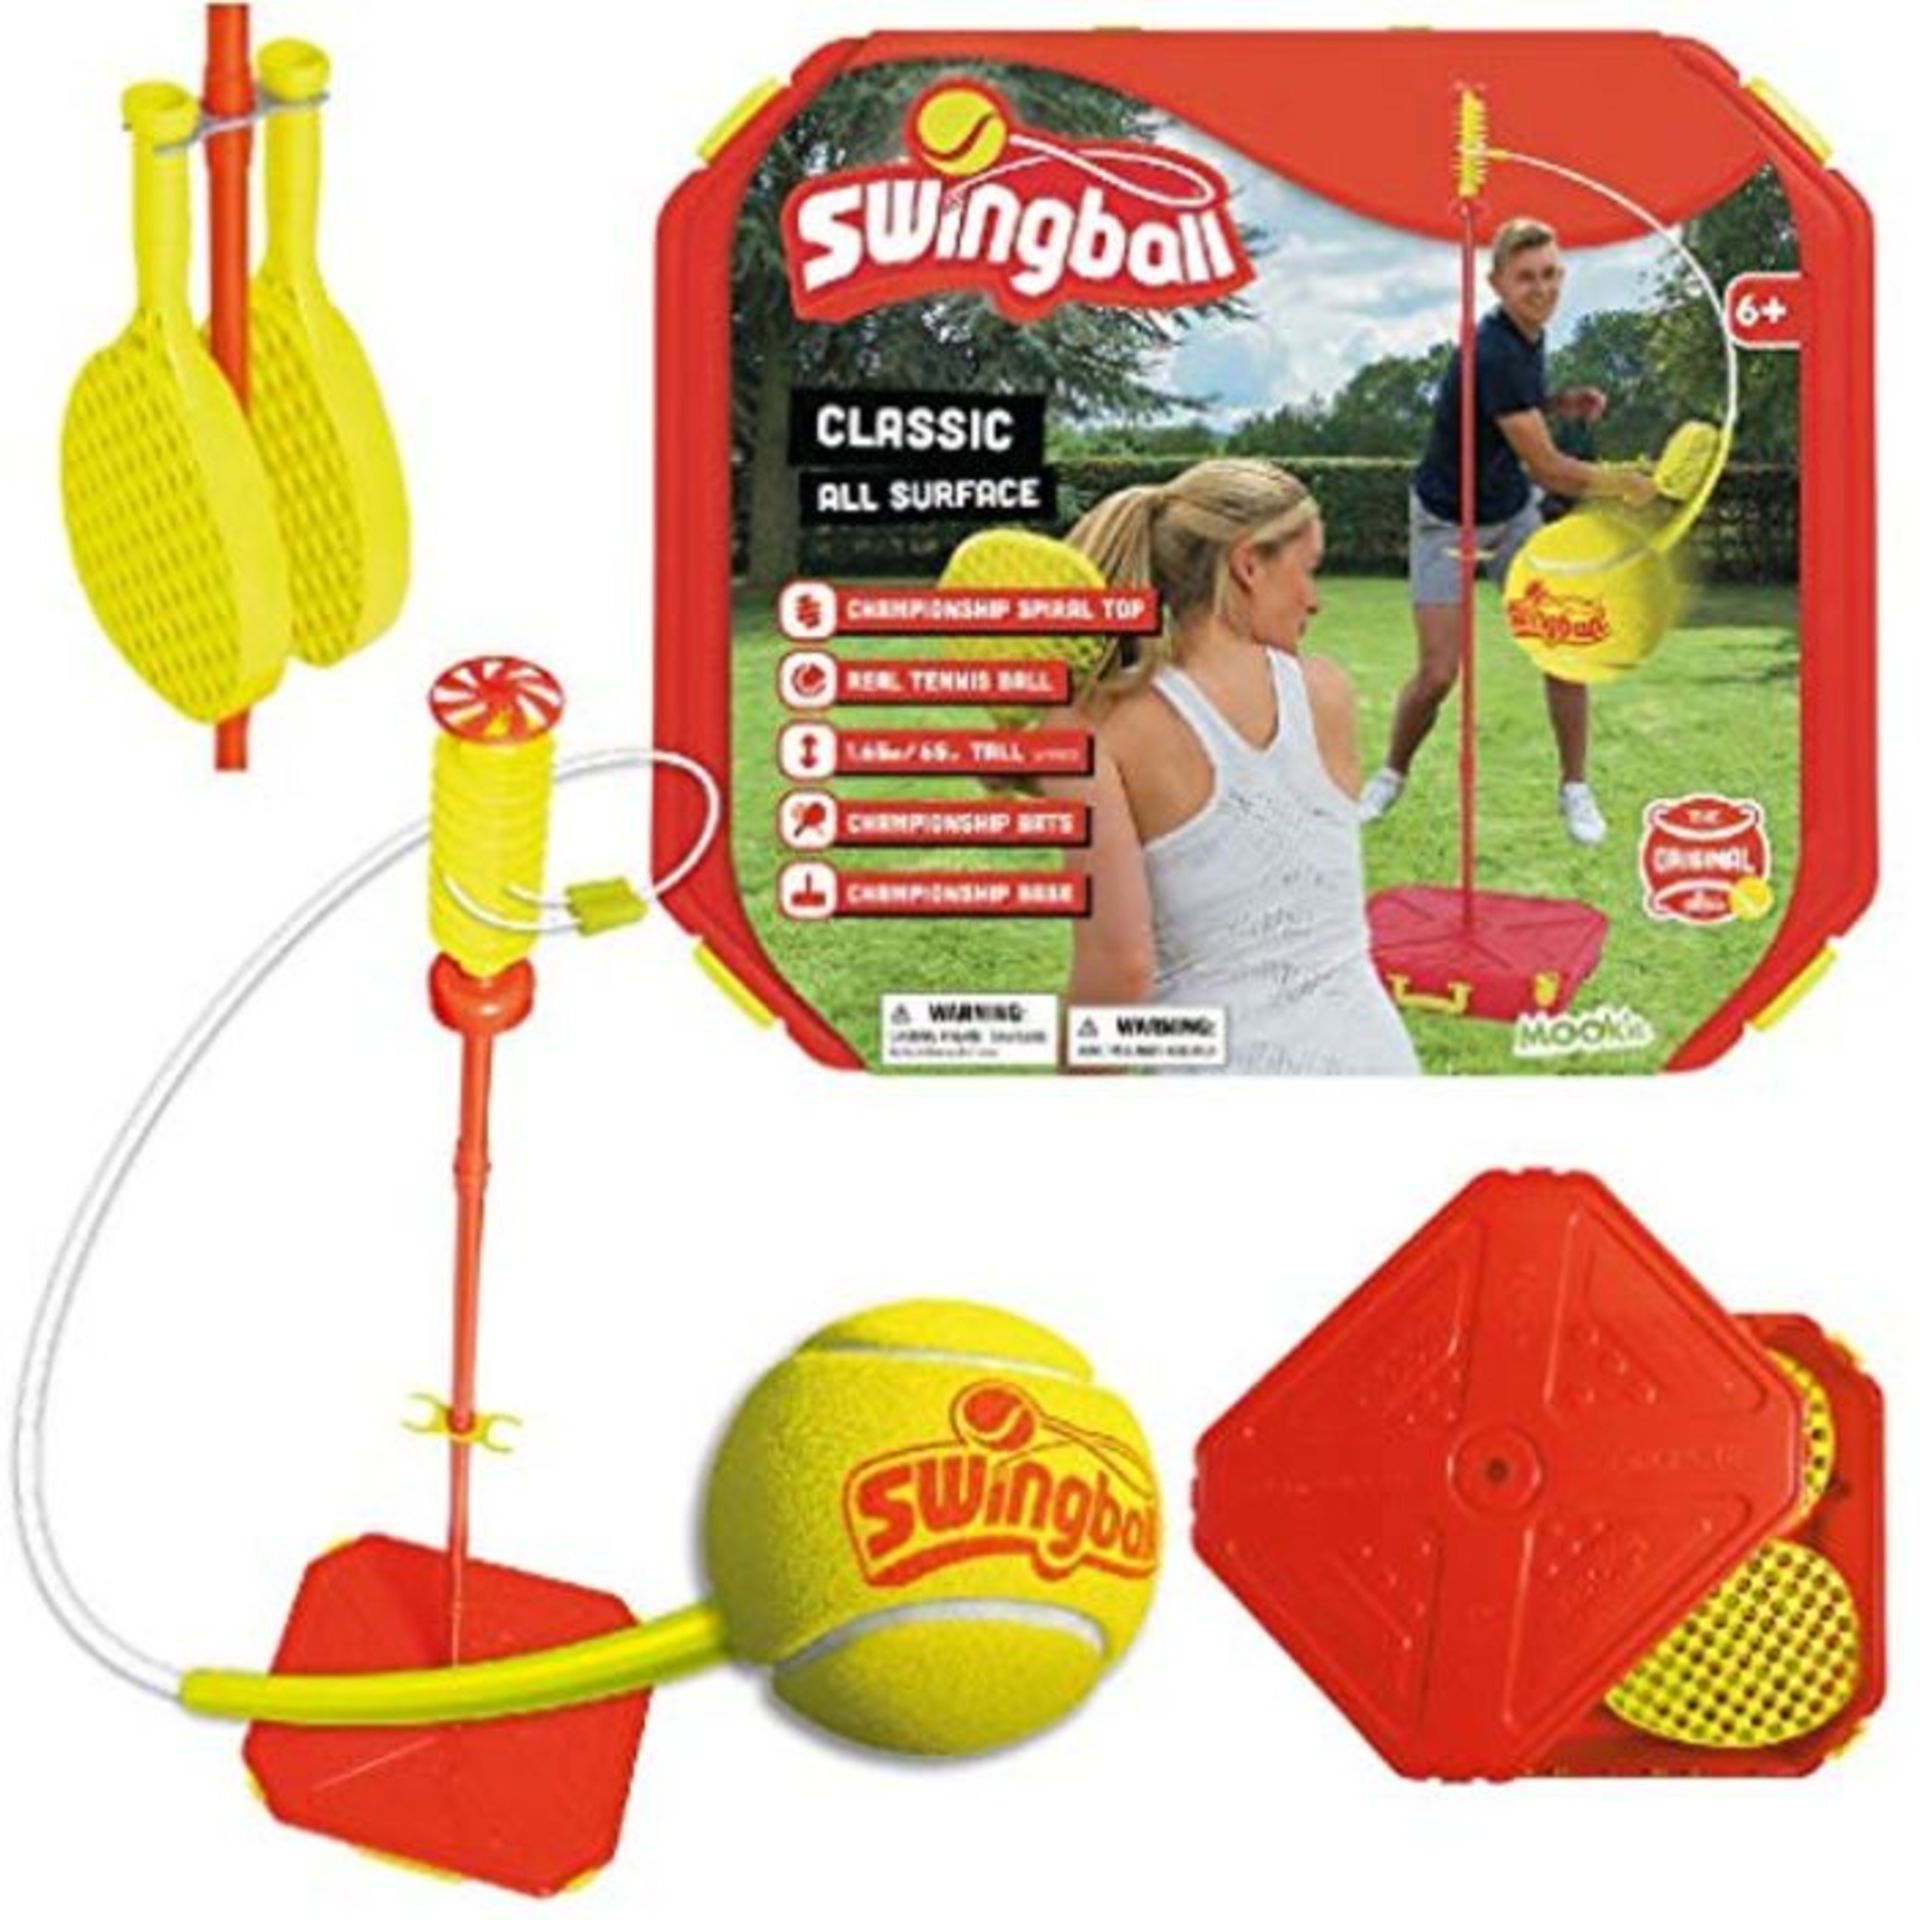 [INCOMPLETE] Swingball 7227 All Surface